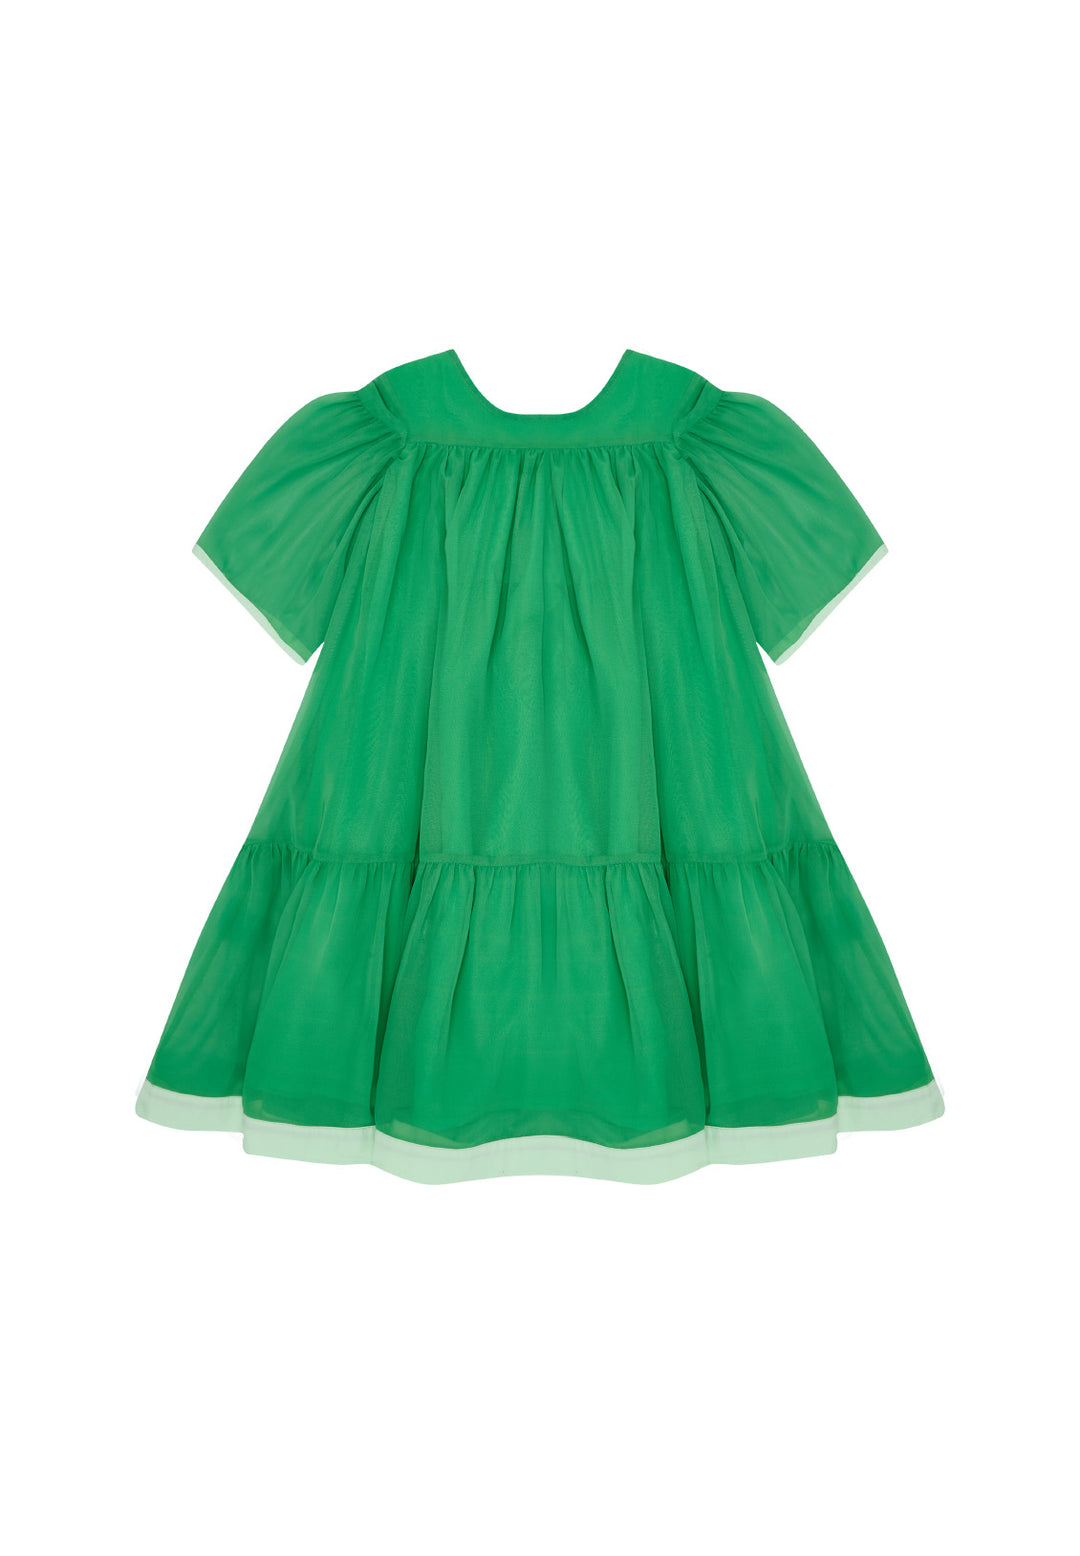 FLOAT YOUR BOAT SPECIAL LENGTH DRESS-CRICKET GREEN